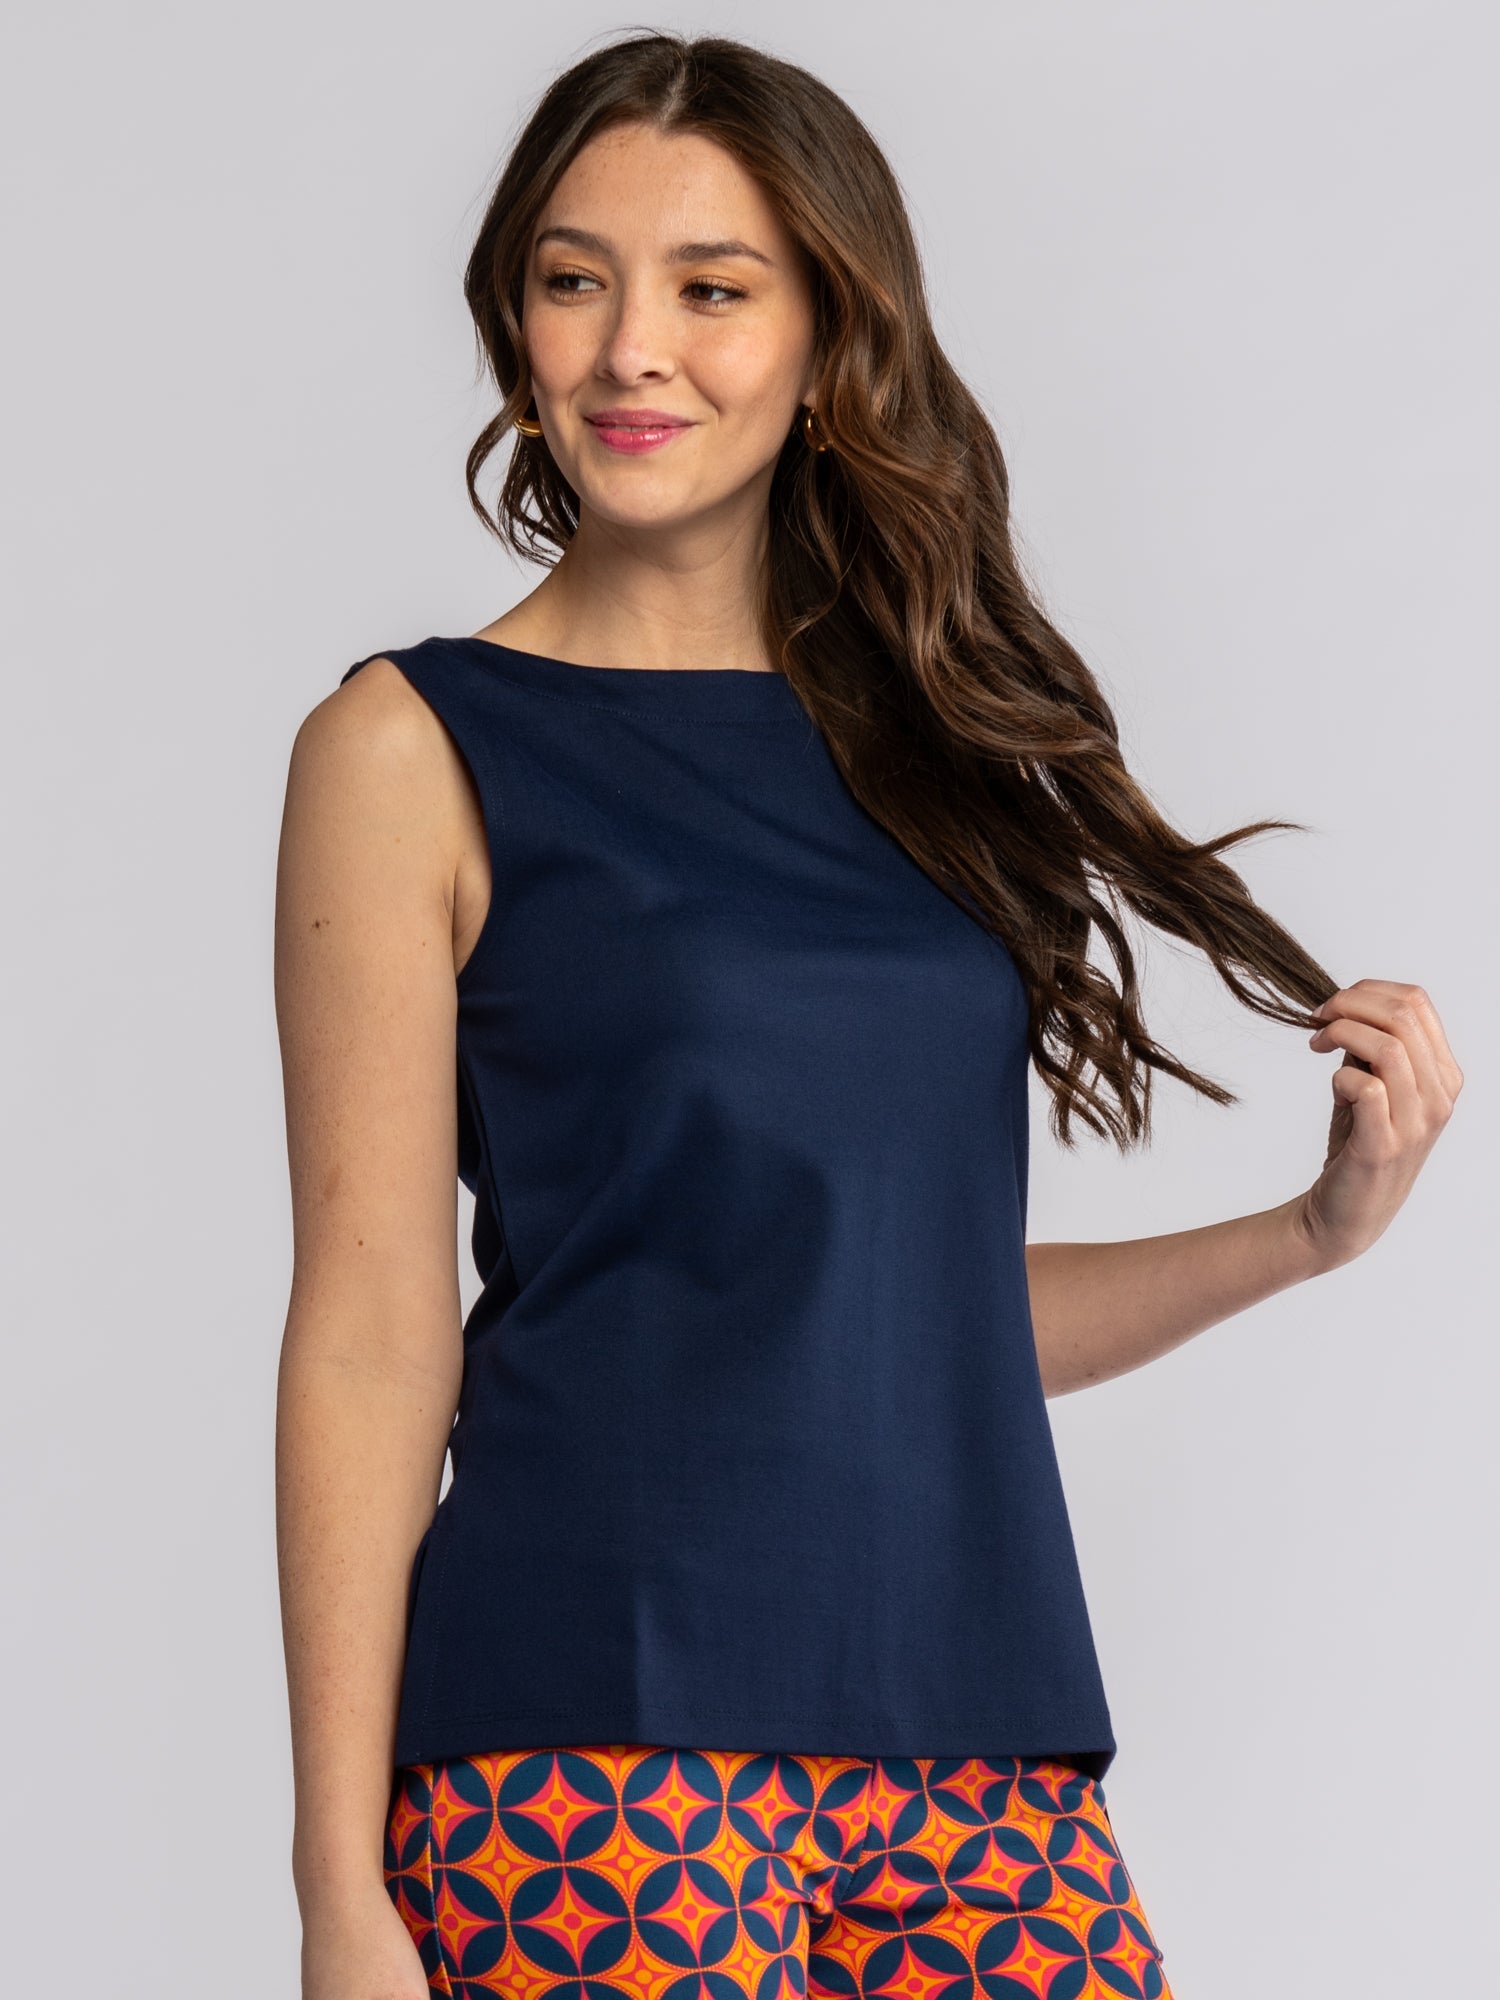 STELLA top Navy - Lesley Evers-Navy-Shop-Shop/All Products